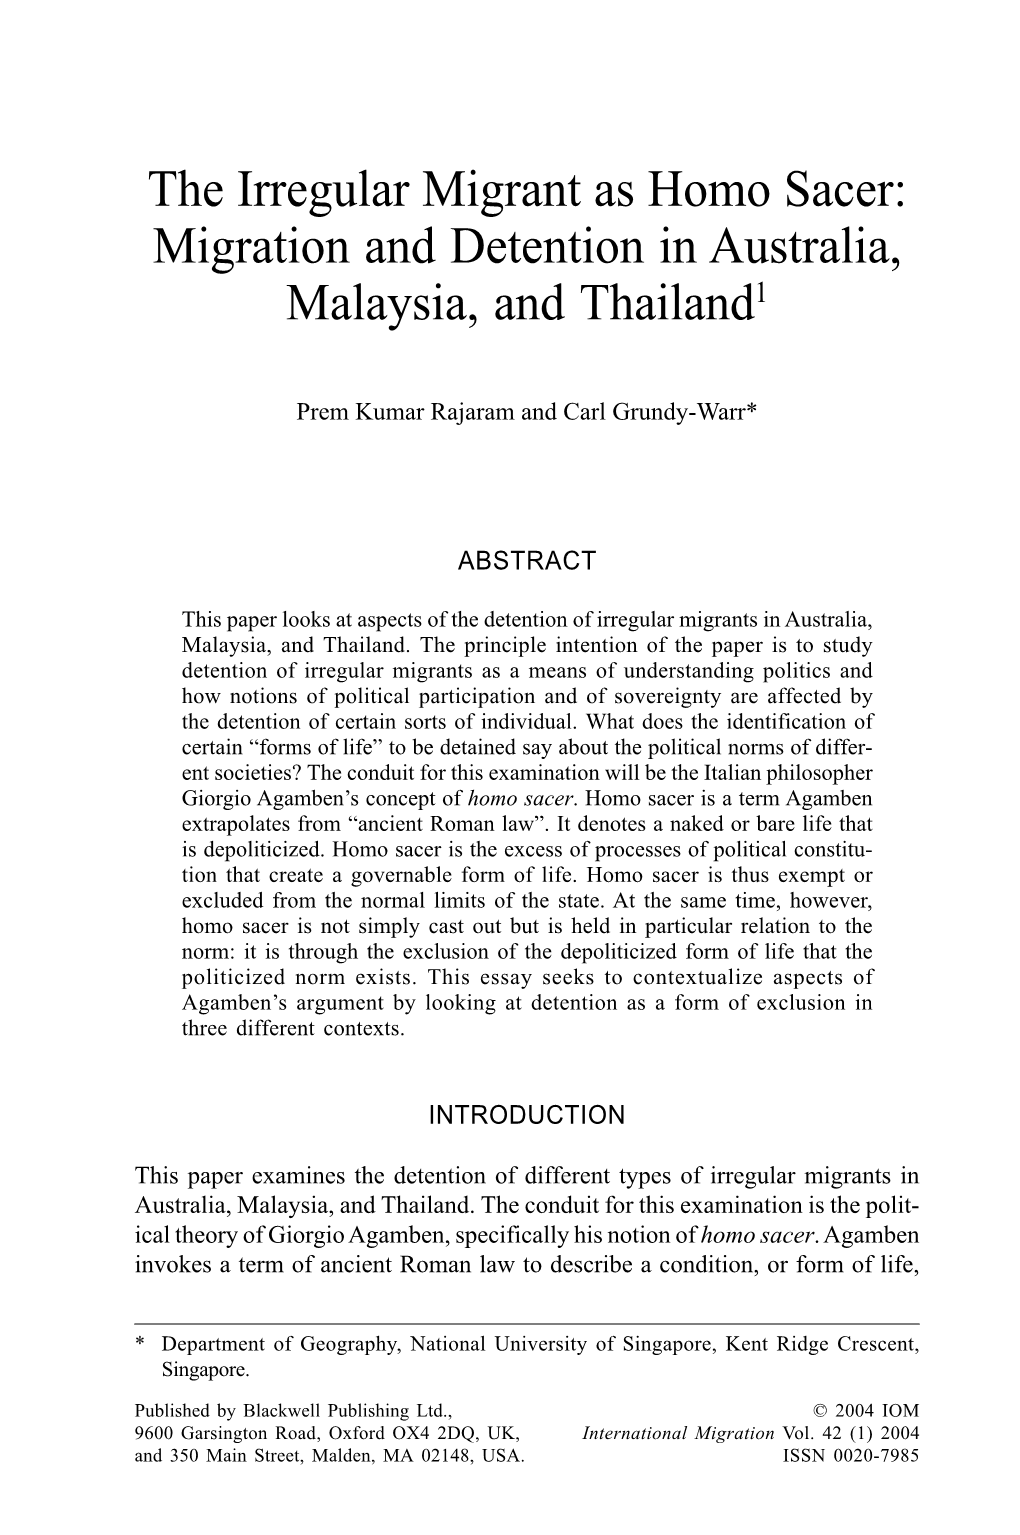 The Irregular Migrant As Homo Sacer: Migration and Detention in Australia, Malaysia, and Thailand1